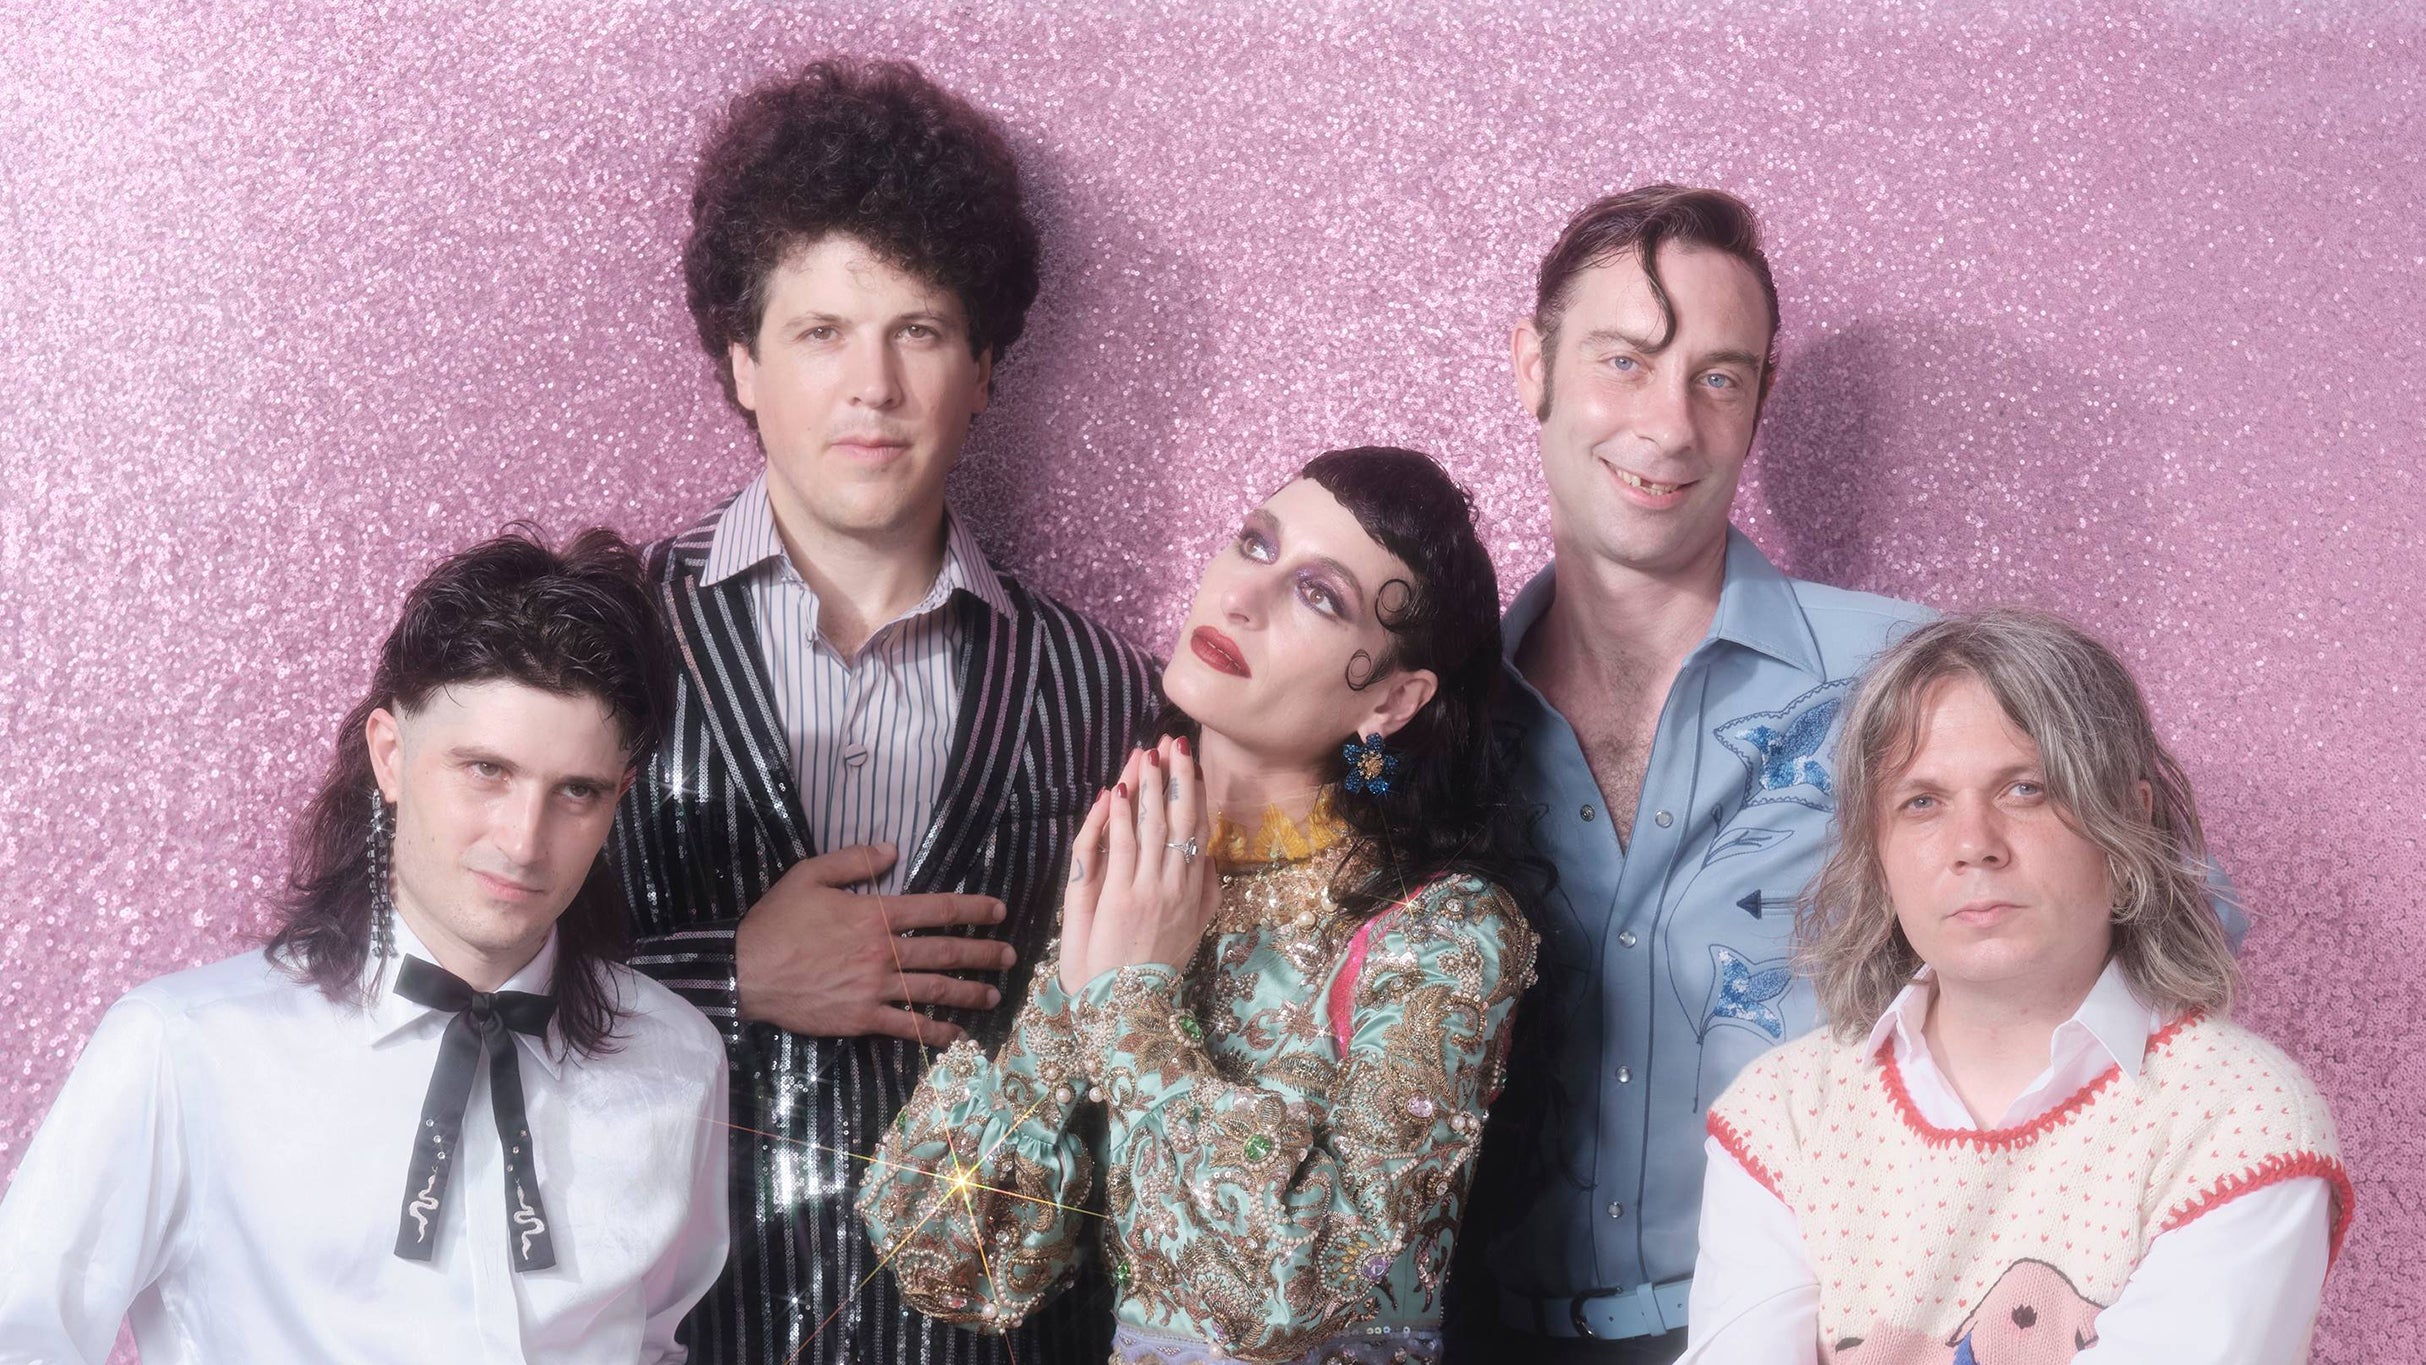 Ticket Reselling CHIRP Radio Welcomes Black Lips / Watermelon (Early Show)